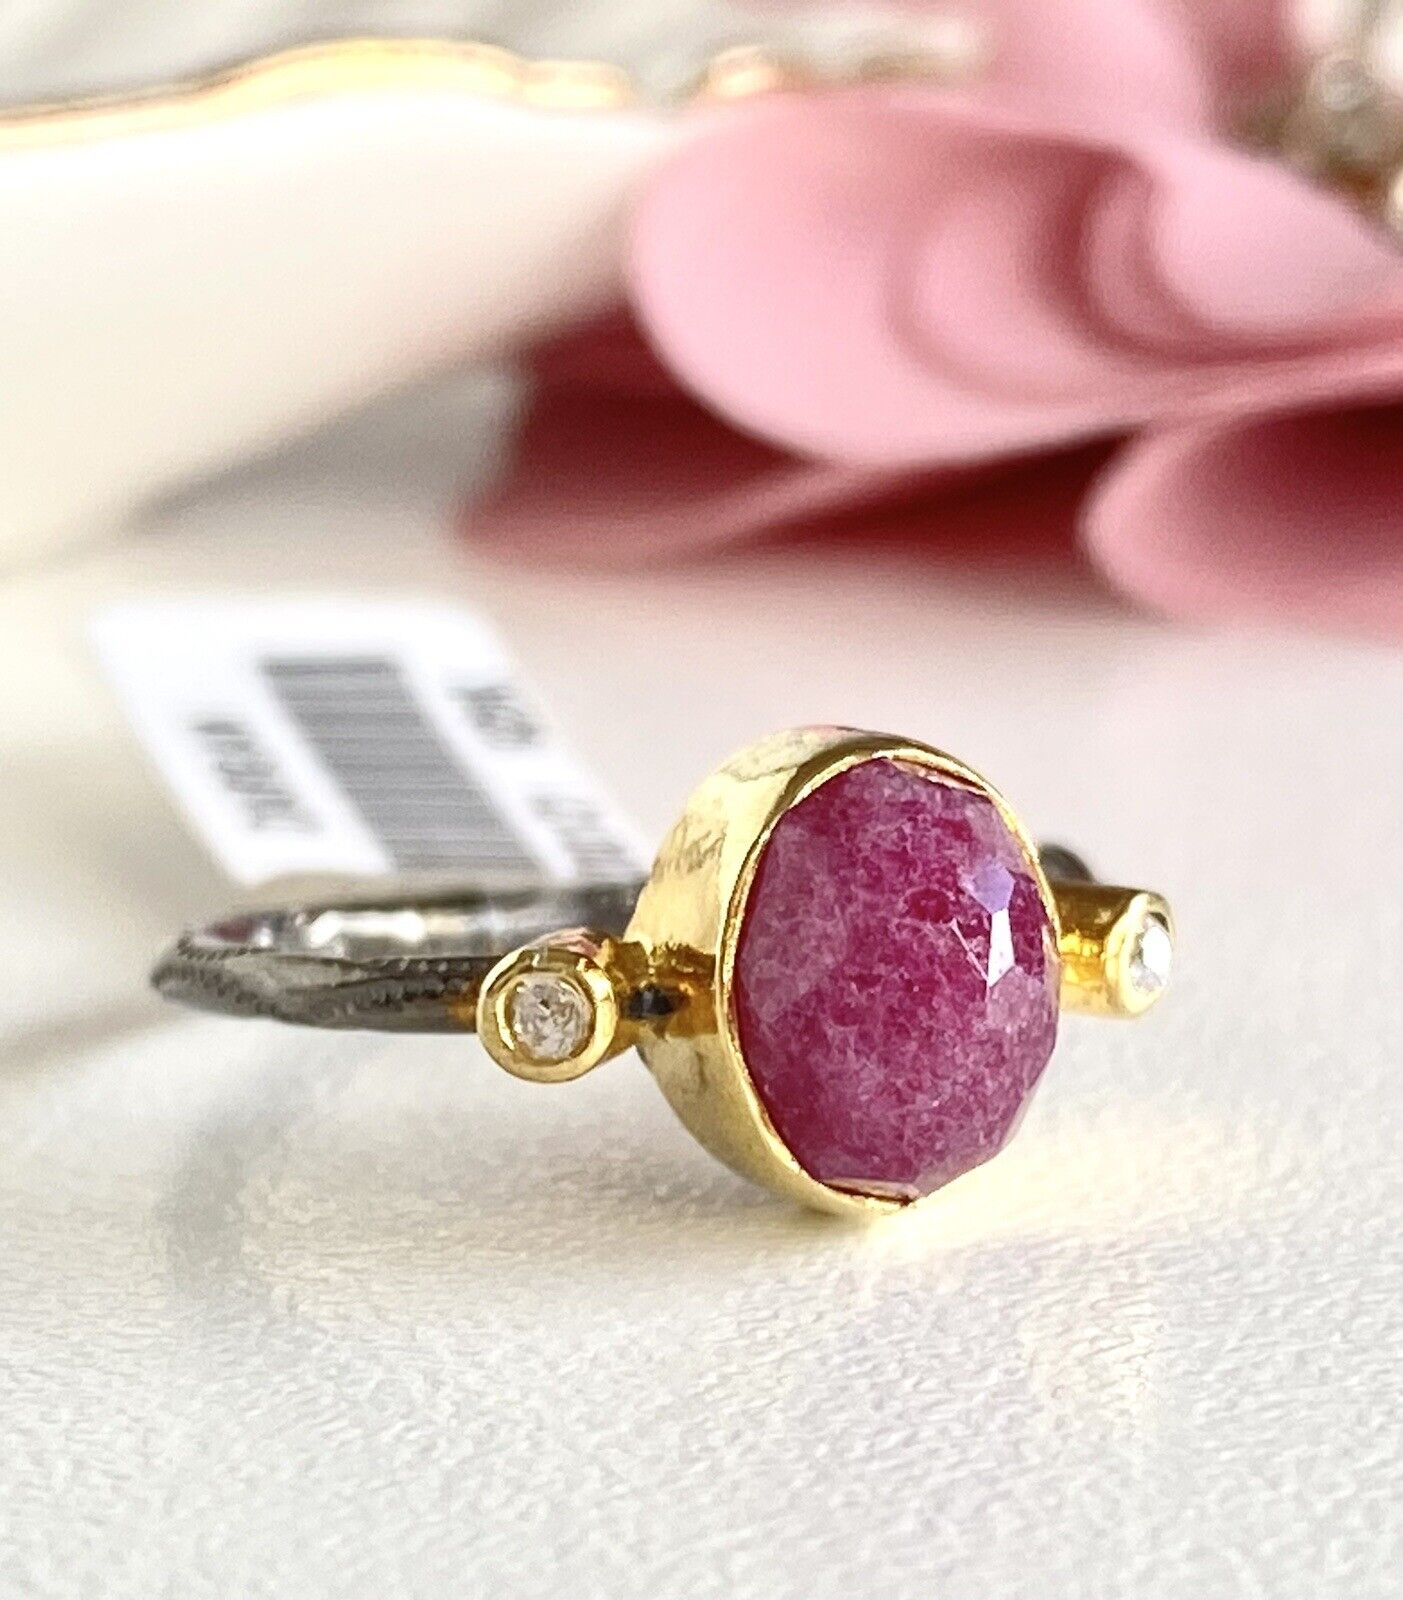 Antiqued Sterling Silver 22k Yellow Gold Ruby Ring Size 6.25